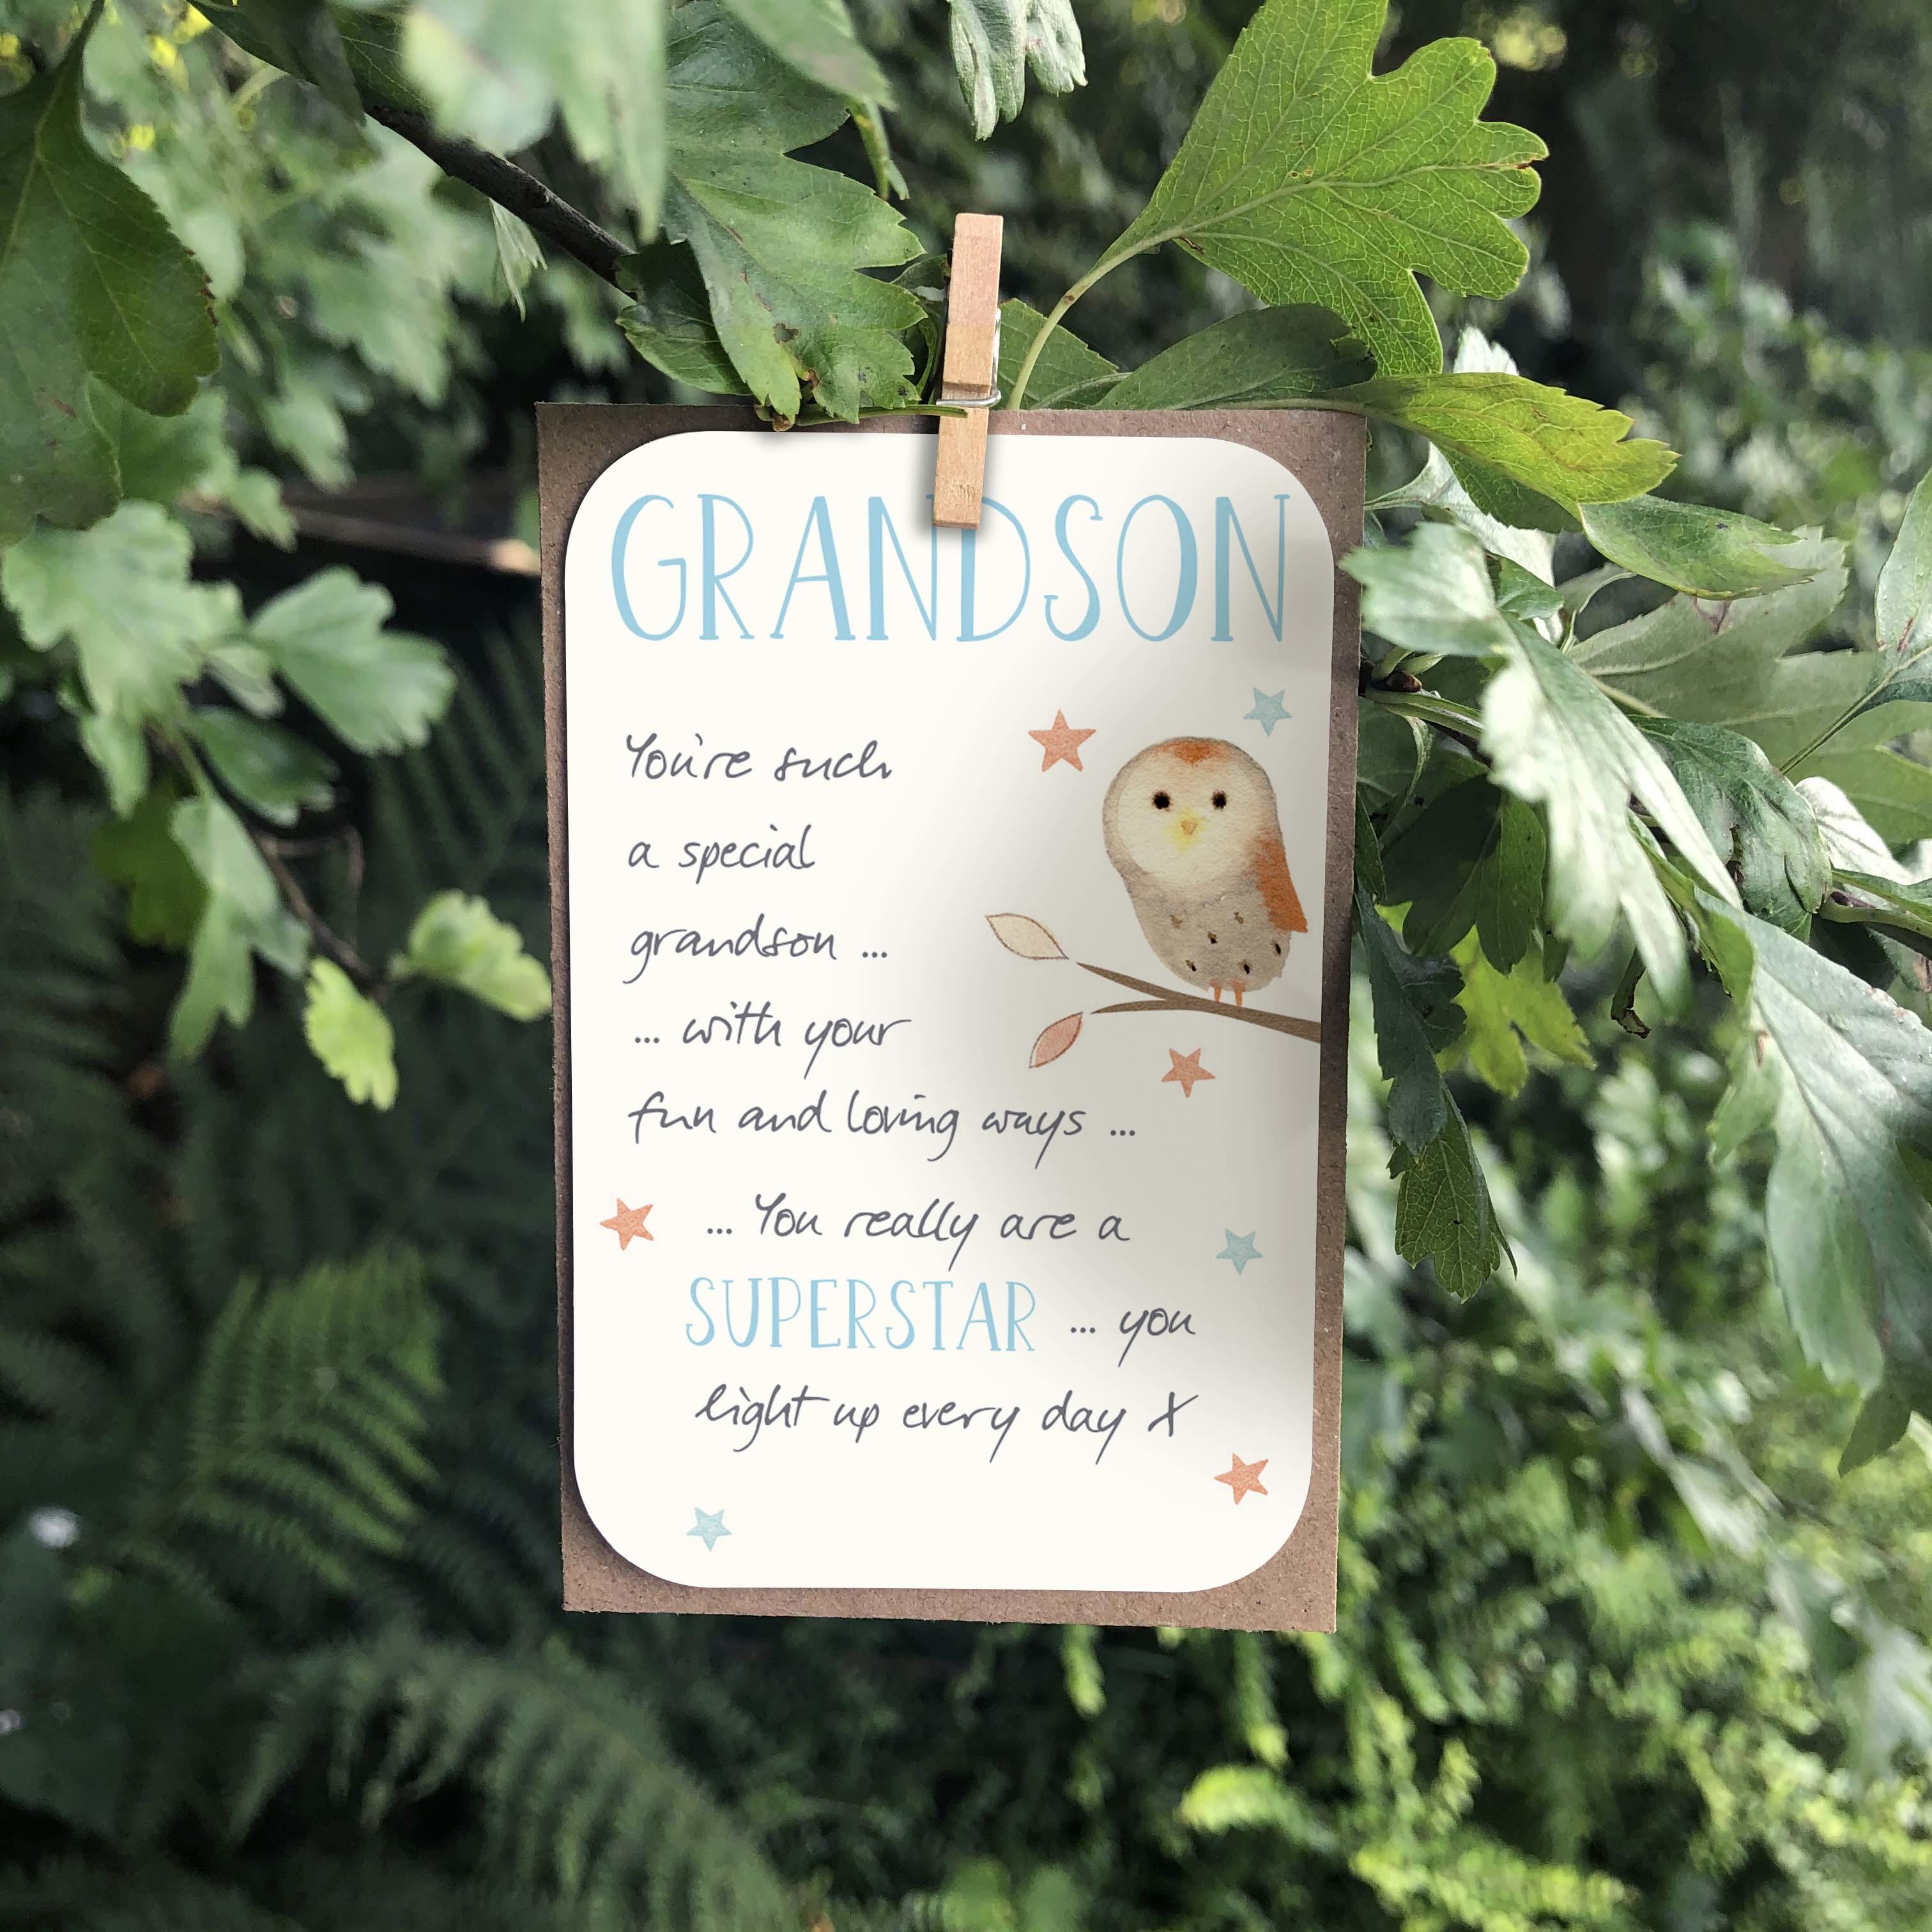 A small keepsake card with a lovely “Grandson” caption and message, features an illustration of a cute owl sitting in a tree.